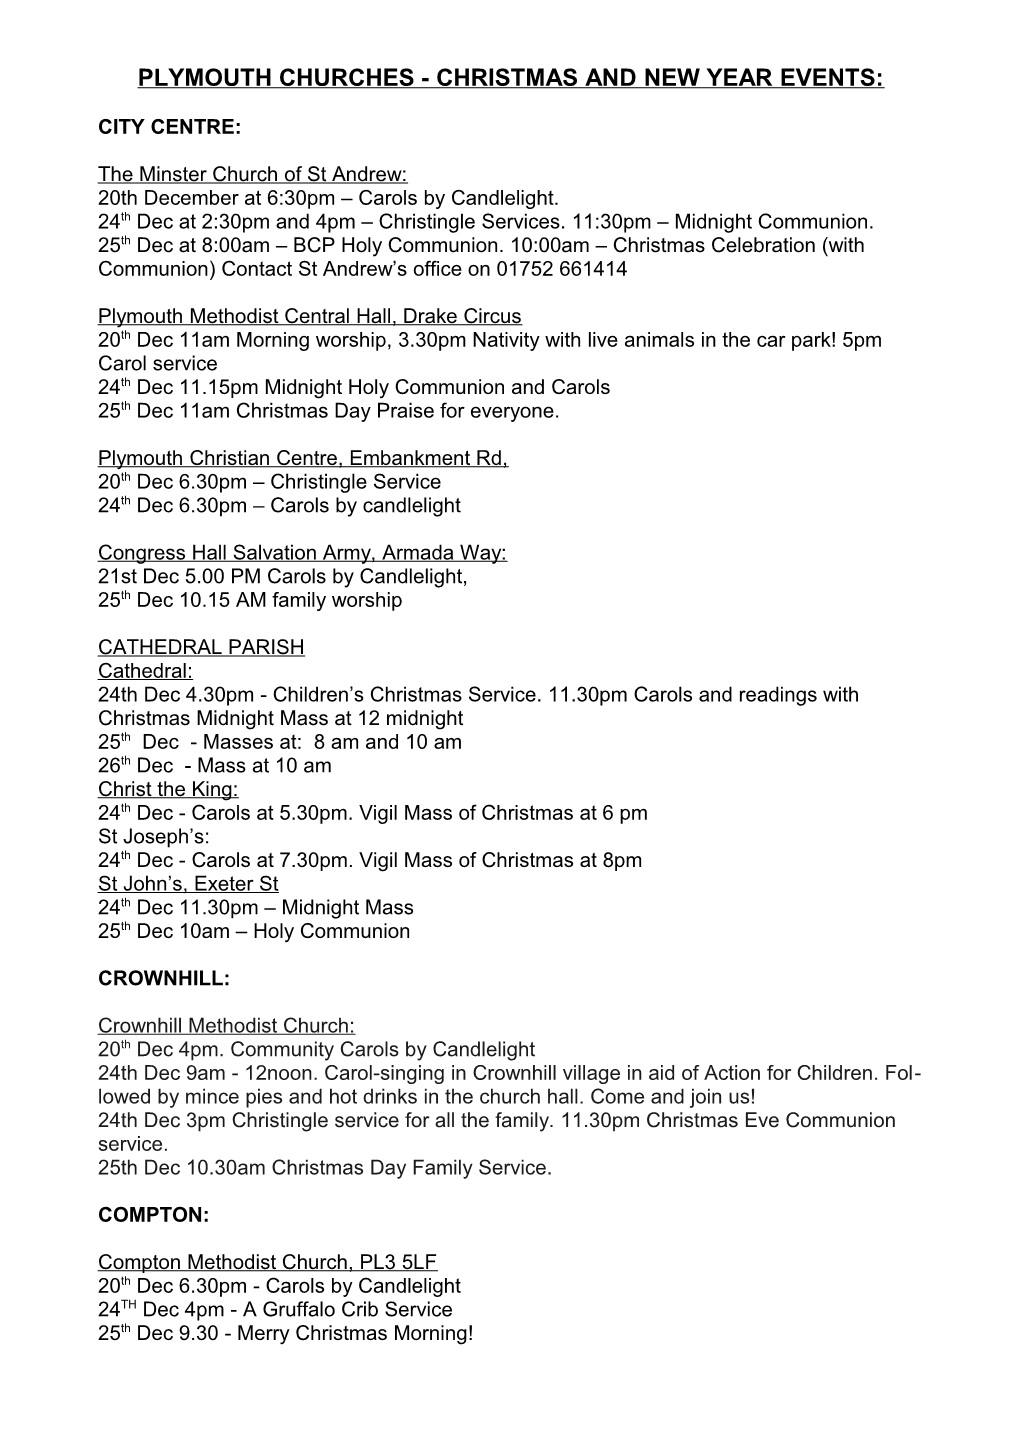 Plymouth Churches - Christmas and New Year Events